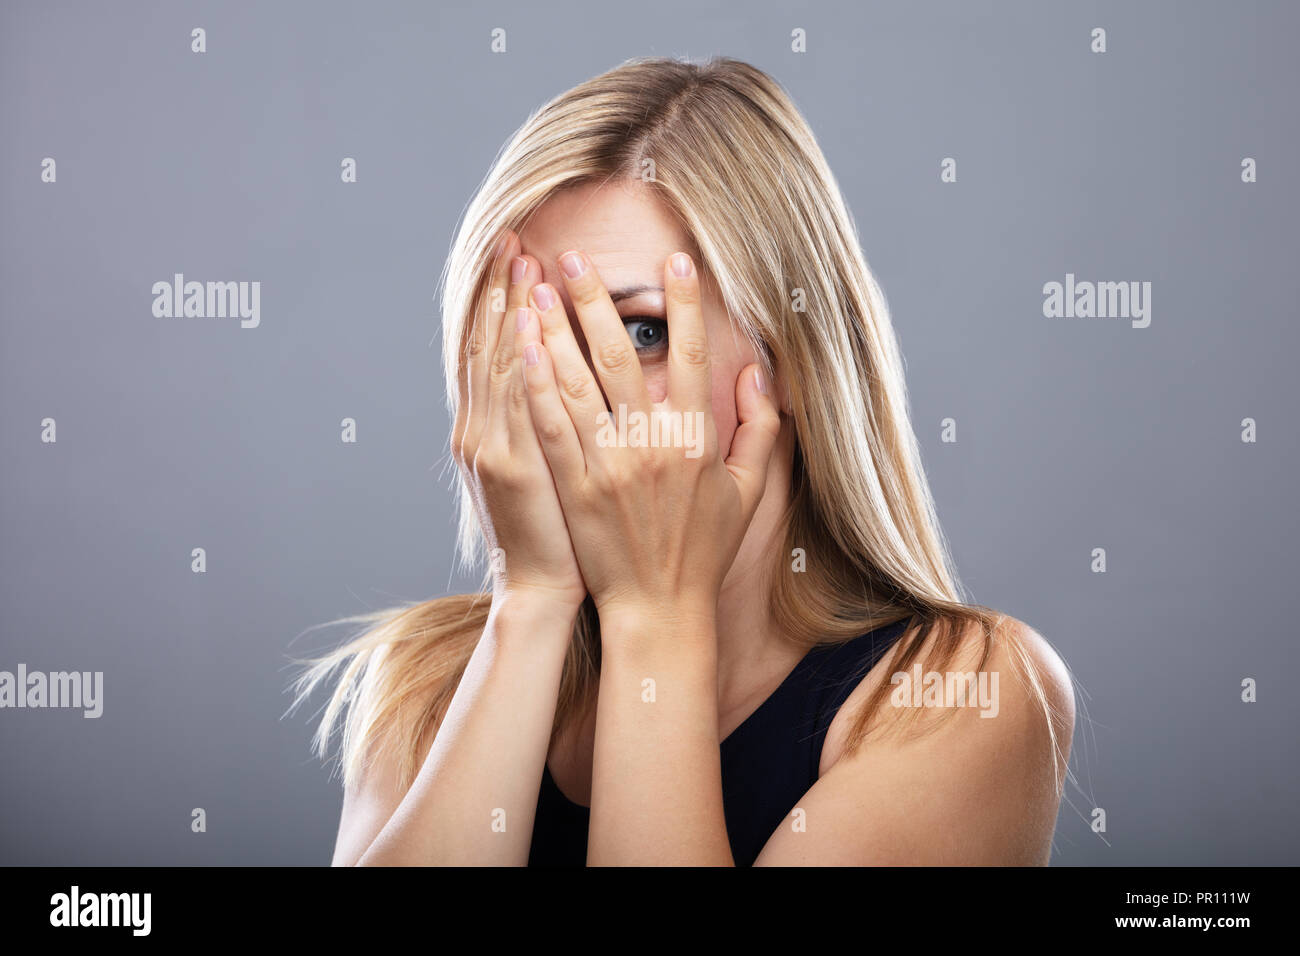 Close-up Of A Scared Woman Peeking Through Fingers Stock Photo